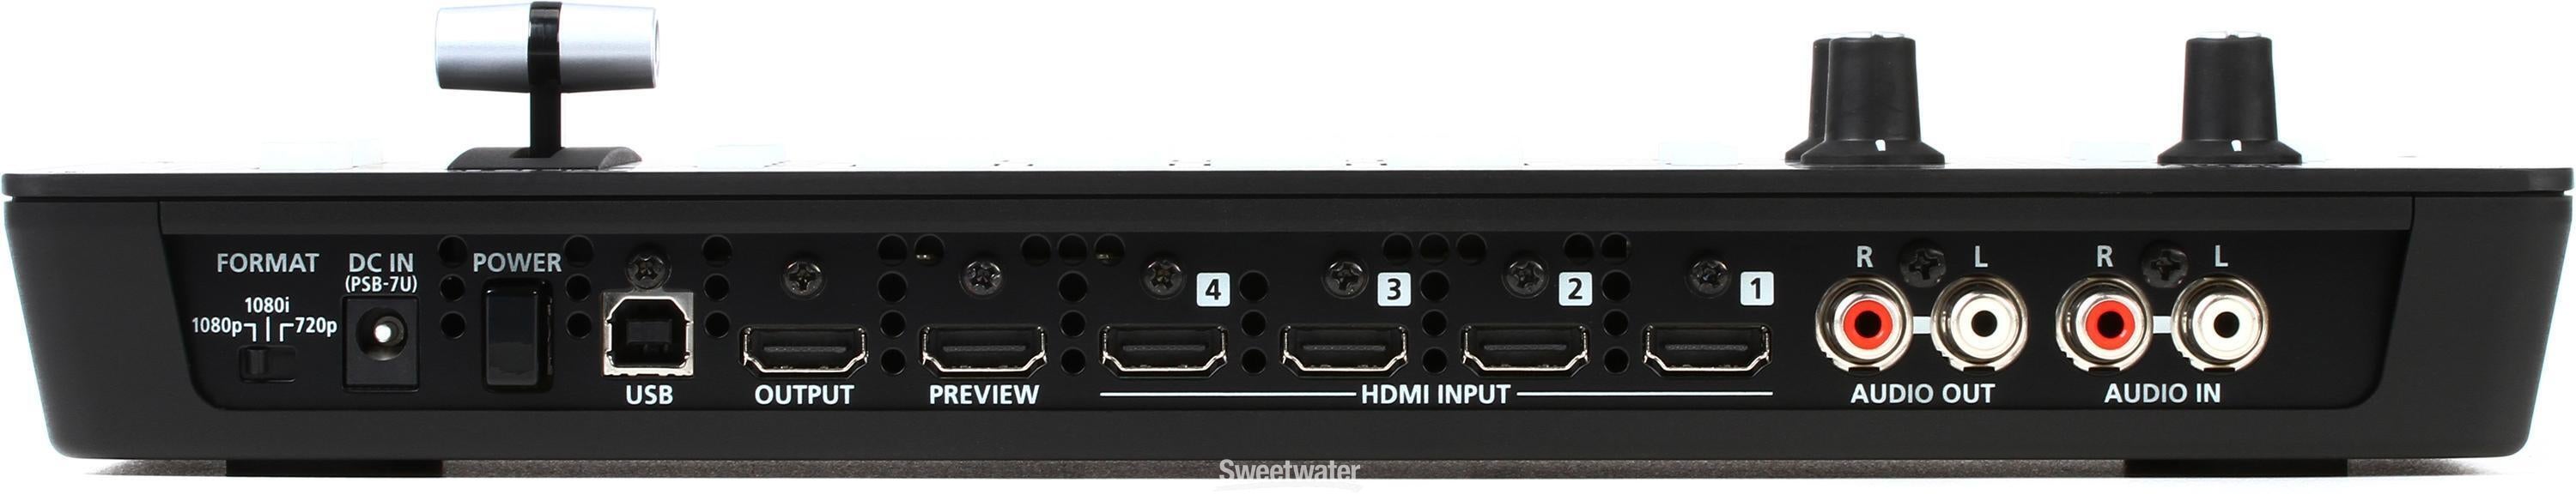 Roland V-1HD 4-channel HD Video Switcher | Sweetwater